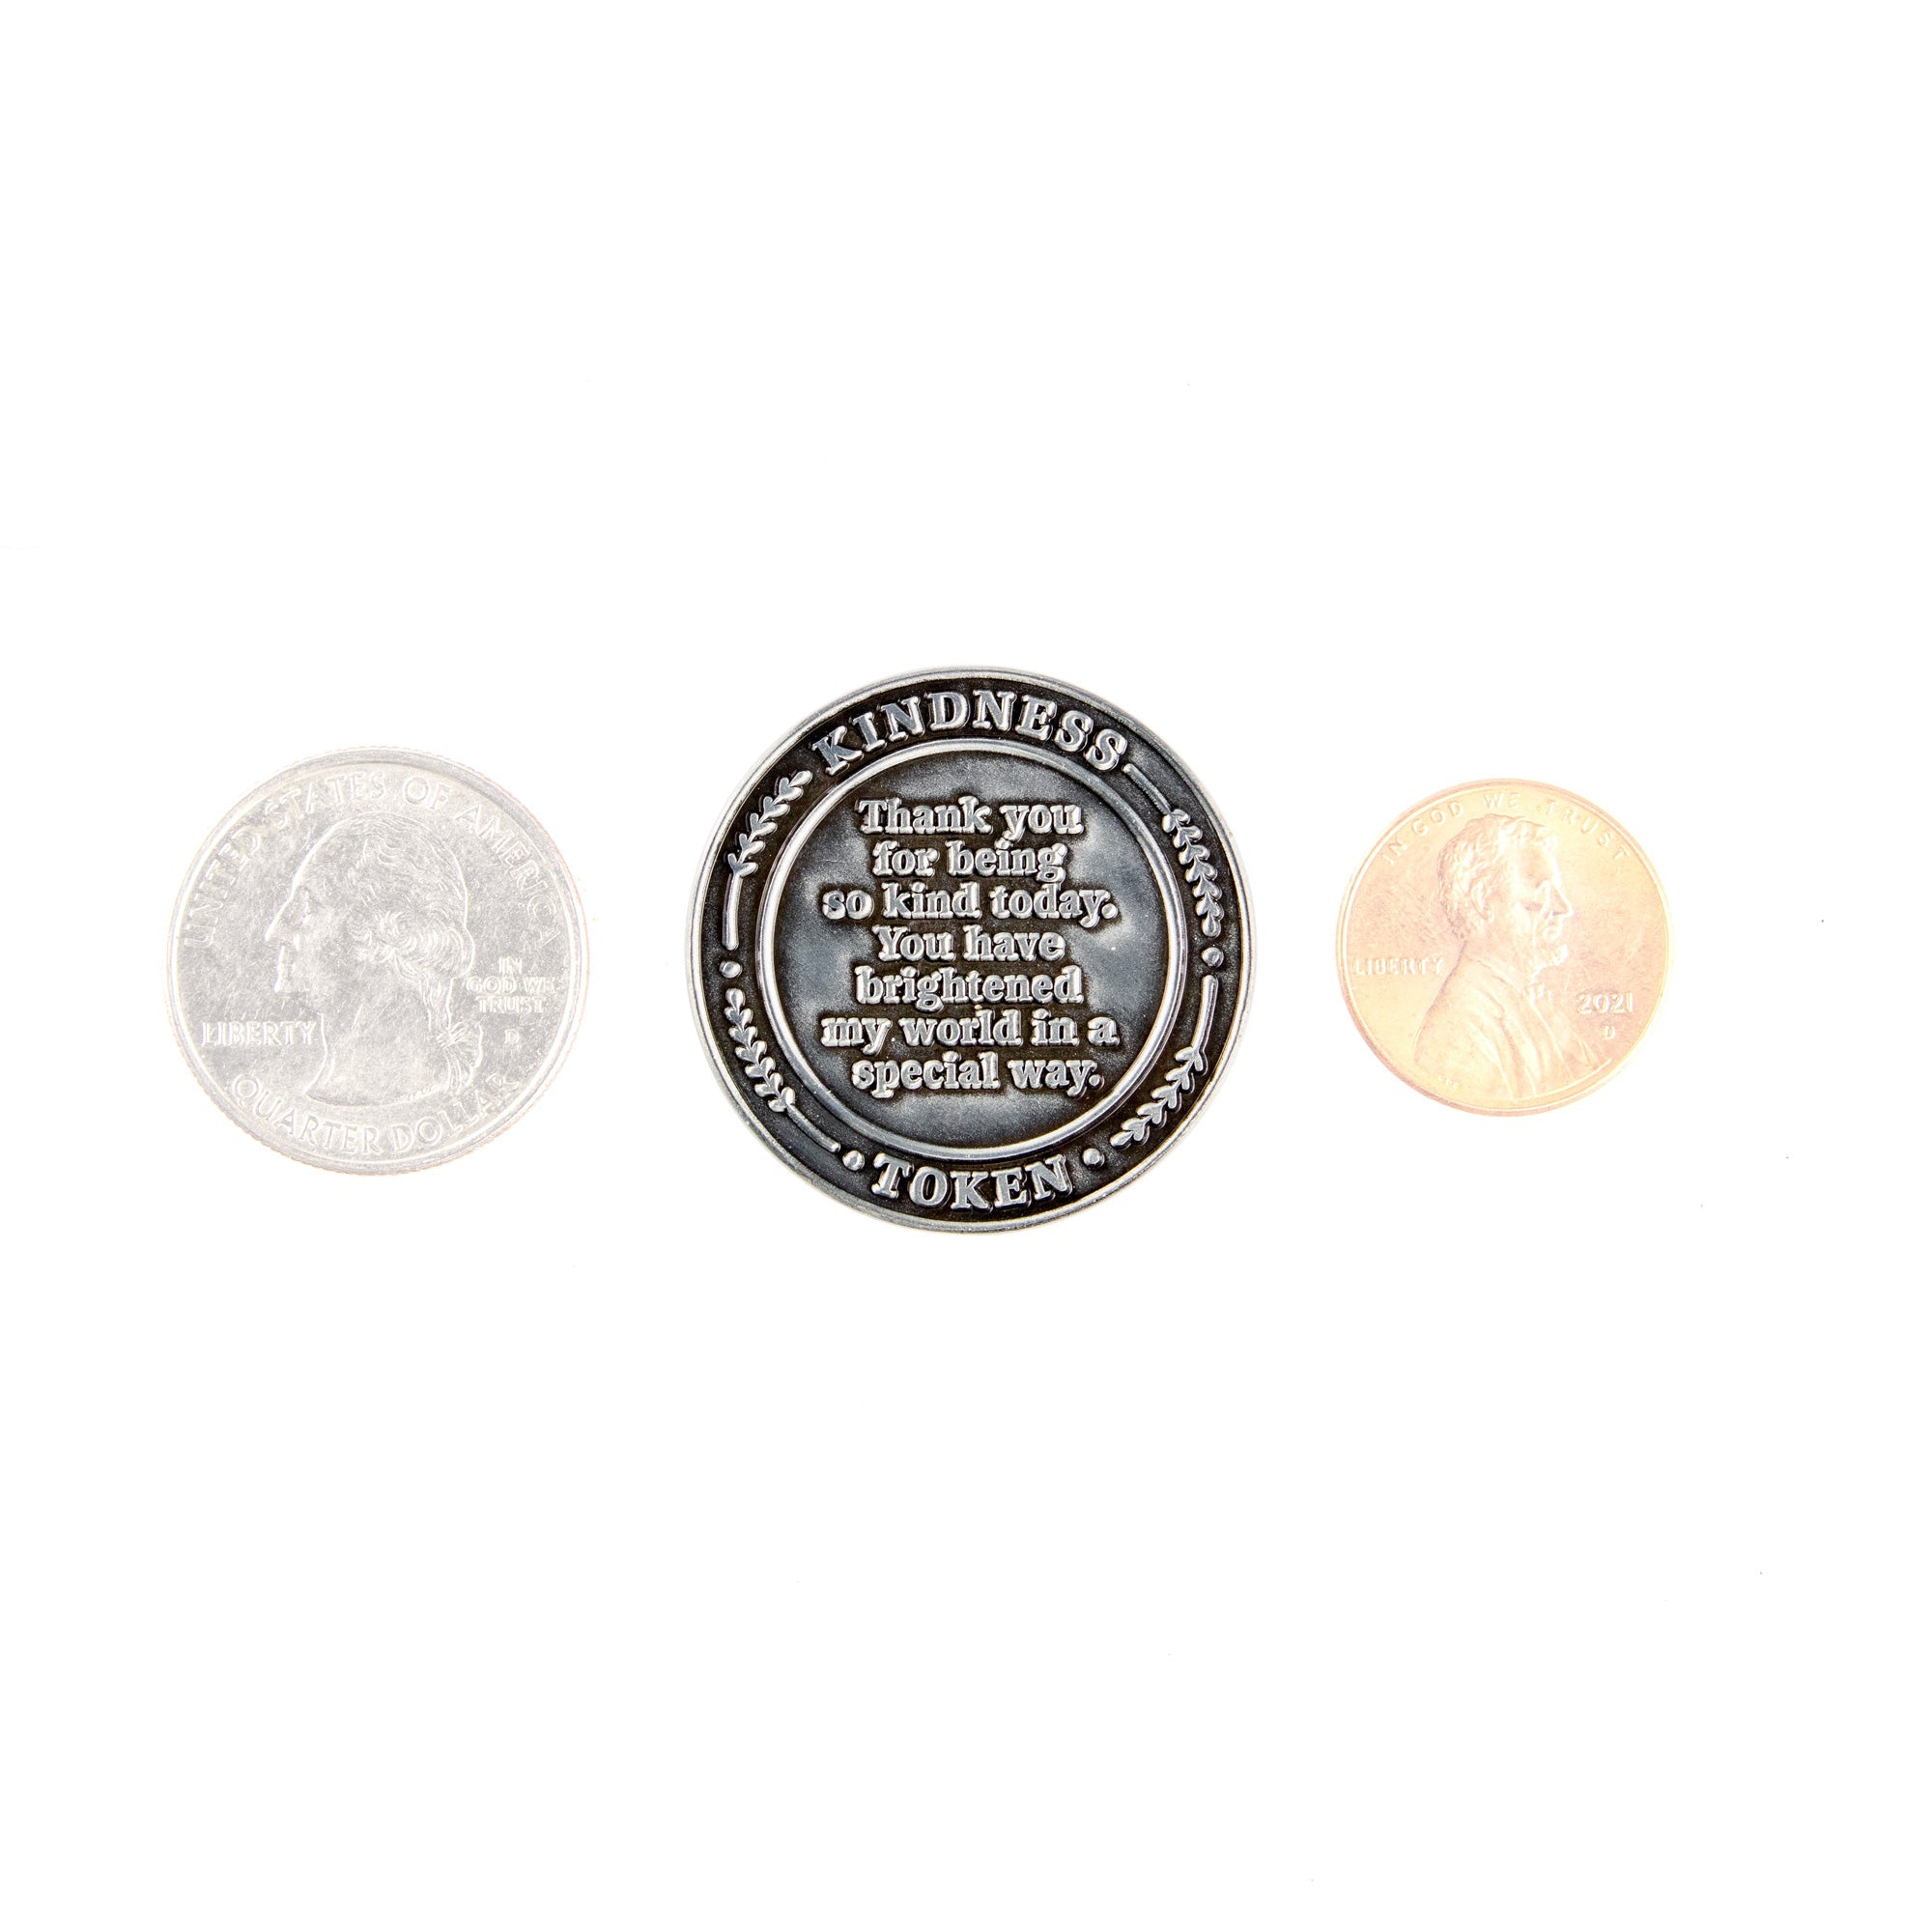 Kindness Token with other coins to show size